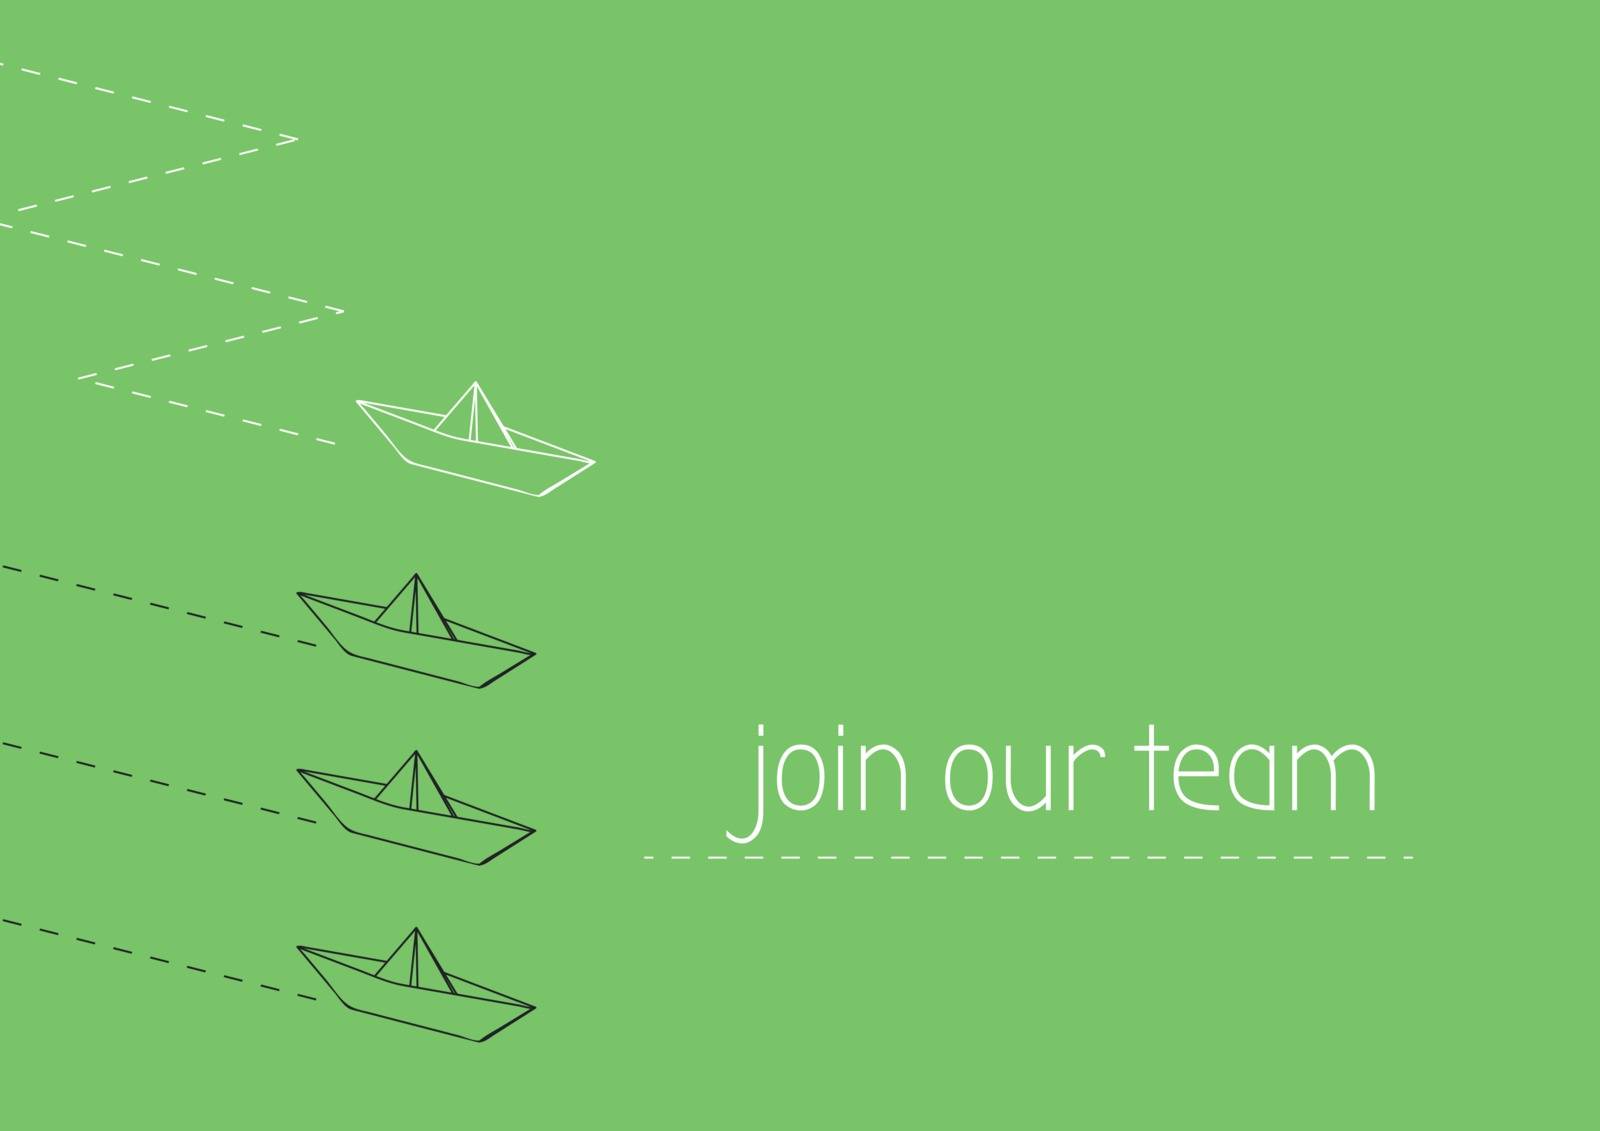 Join our team concept illustration with folded paper boat.